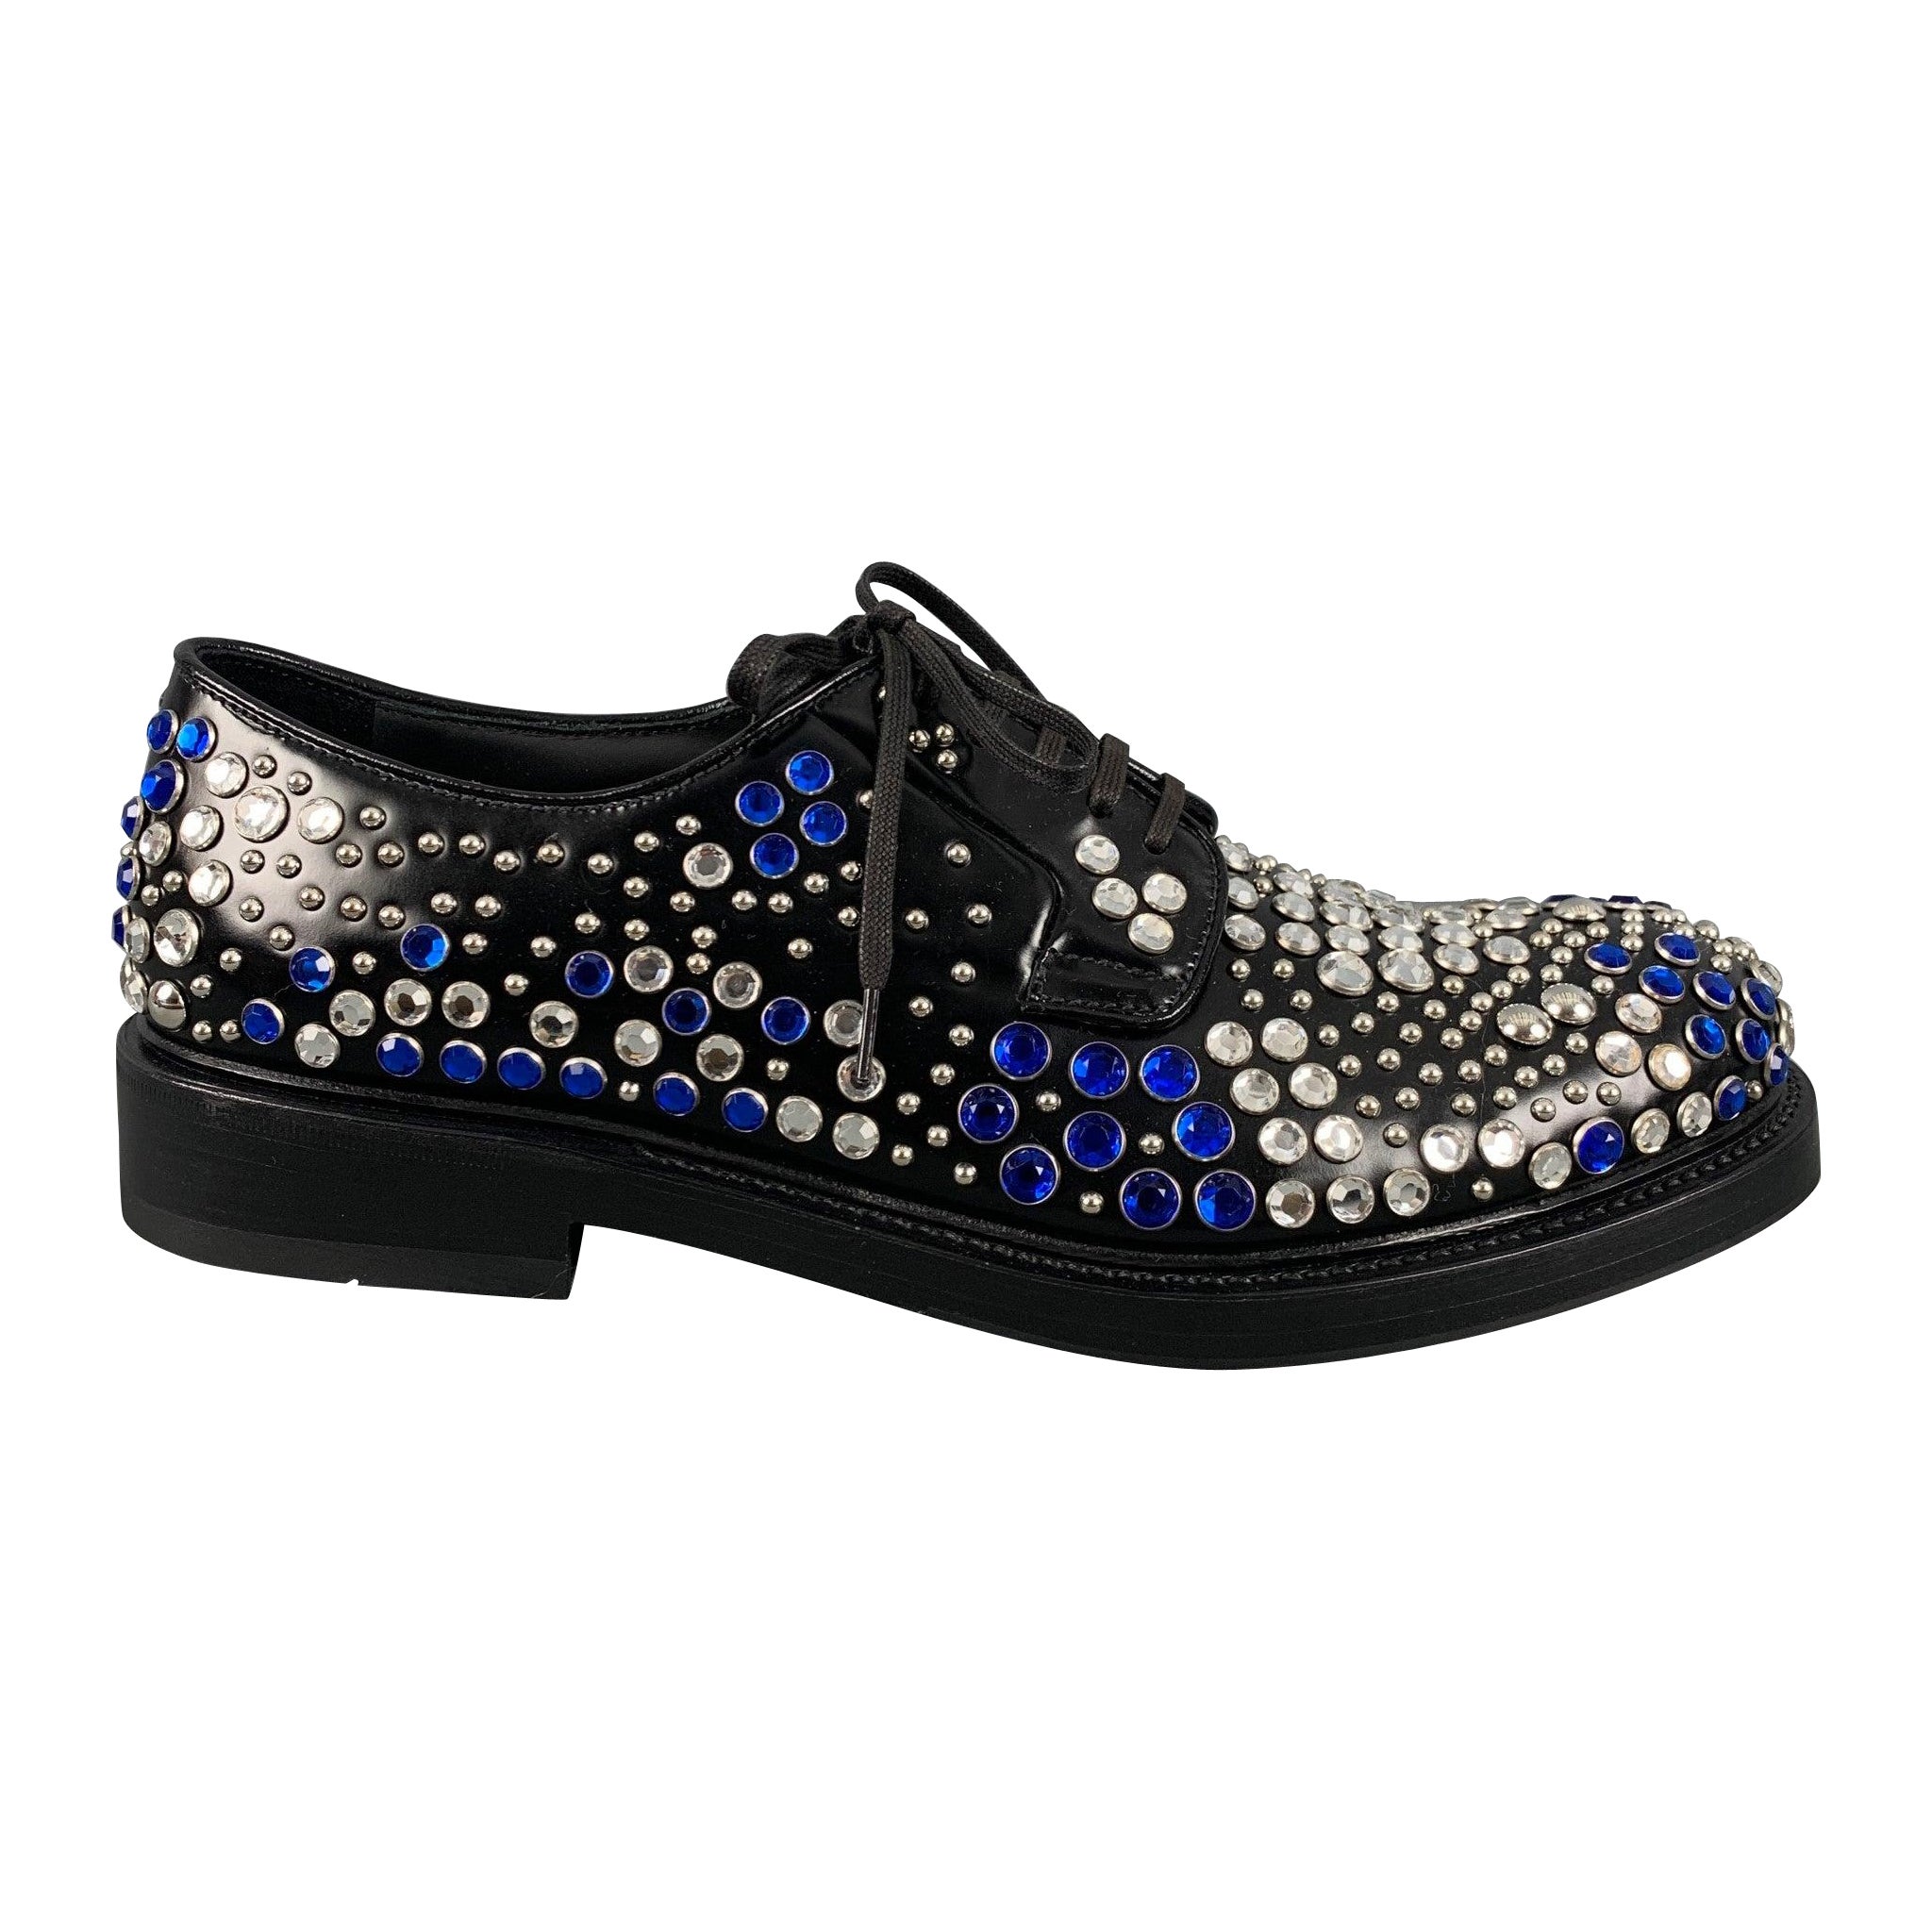 PRADA Size 9 Black Silver & Blue Studded Leather Lace Up Shoes For Sale